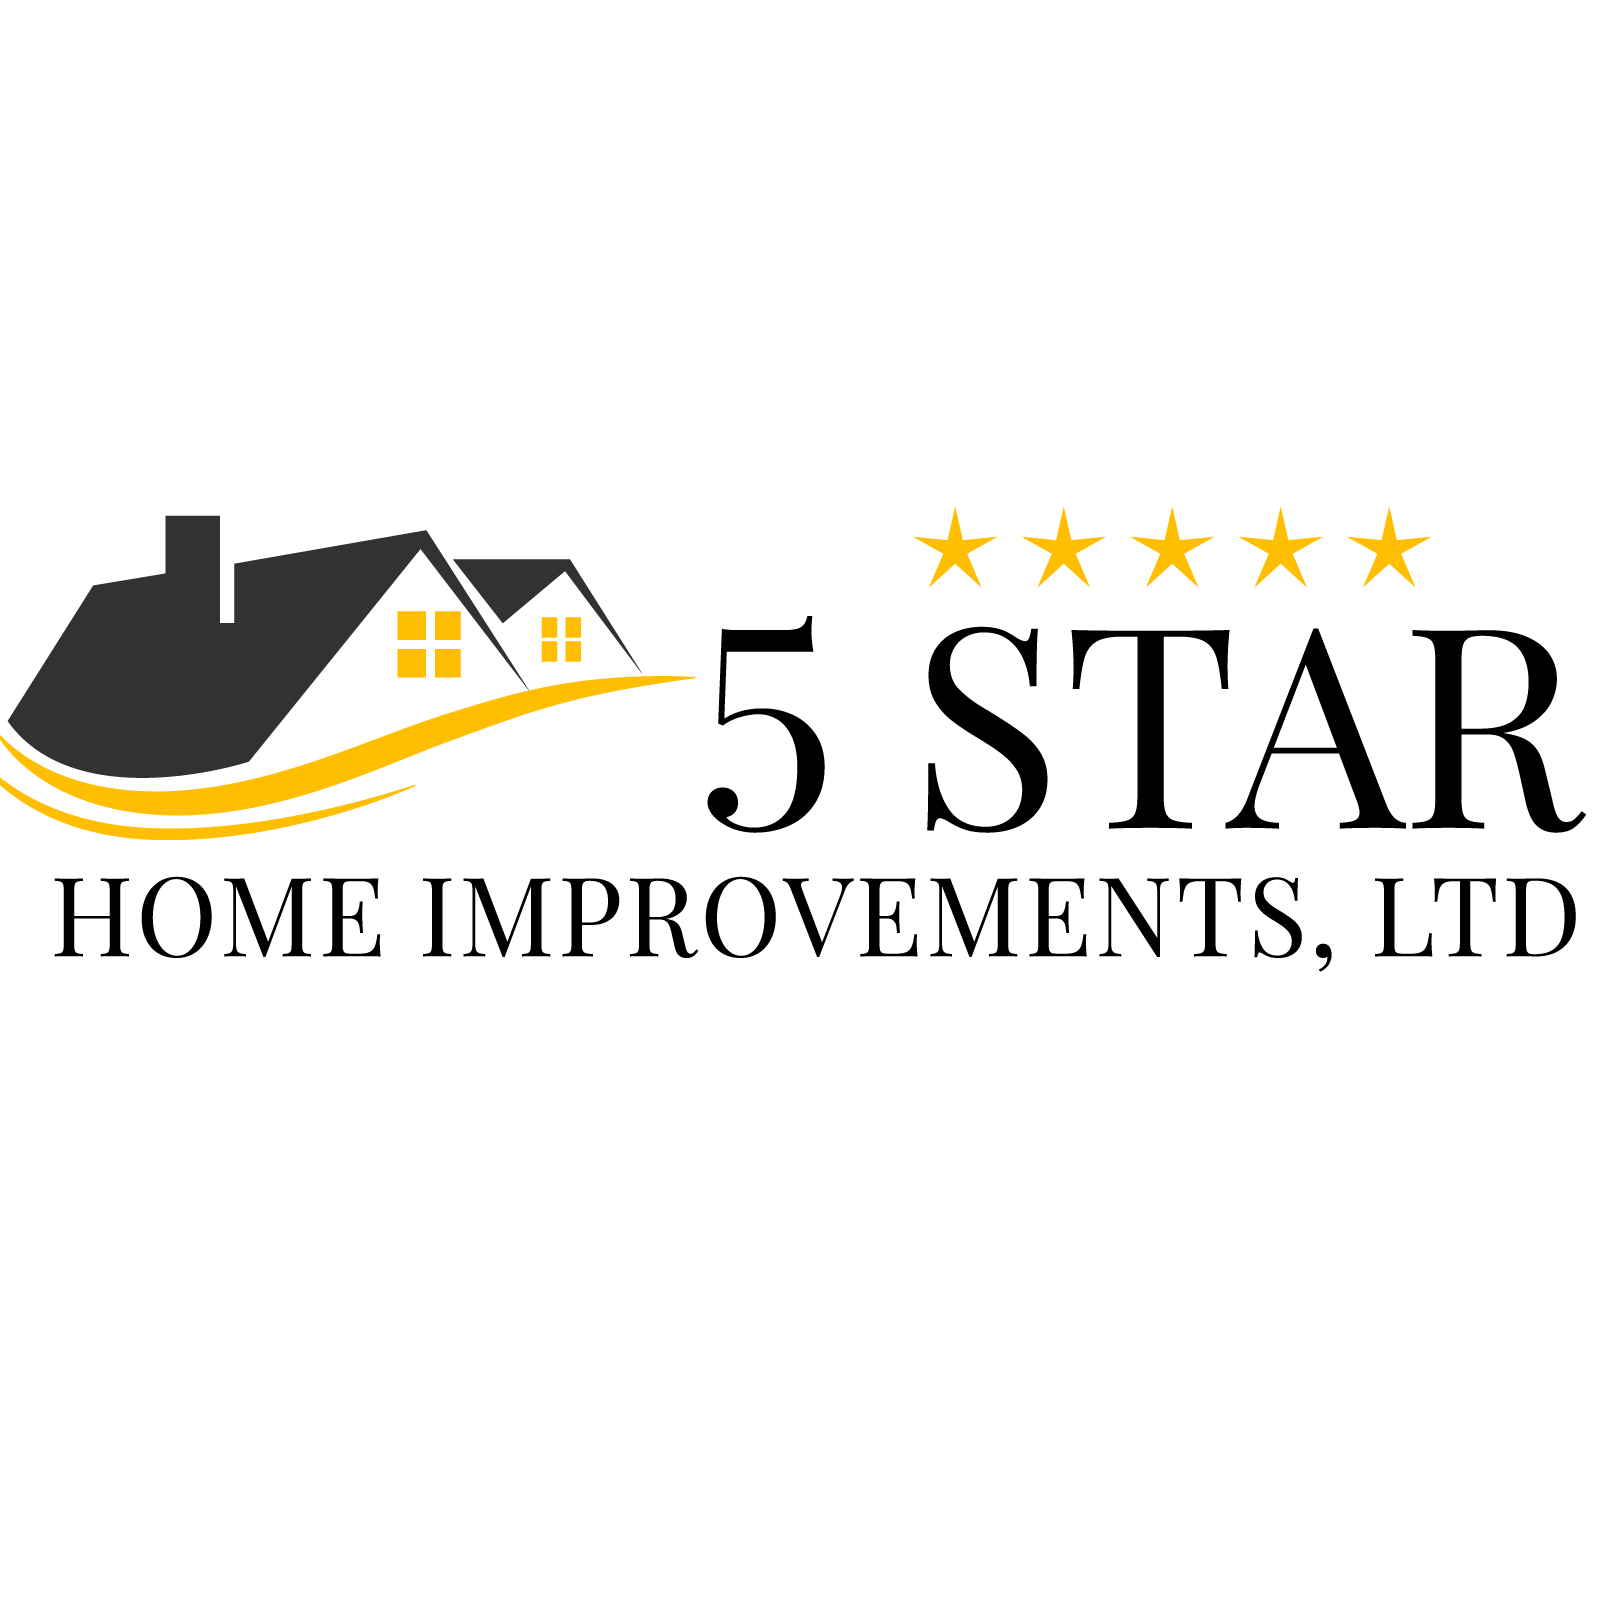 Logo of 5 Star Home Improvements Ltd Roofing Services In Luton, Bedfordshire